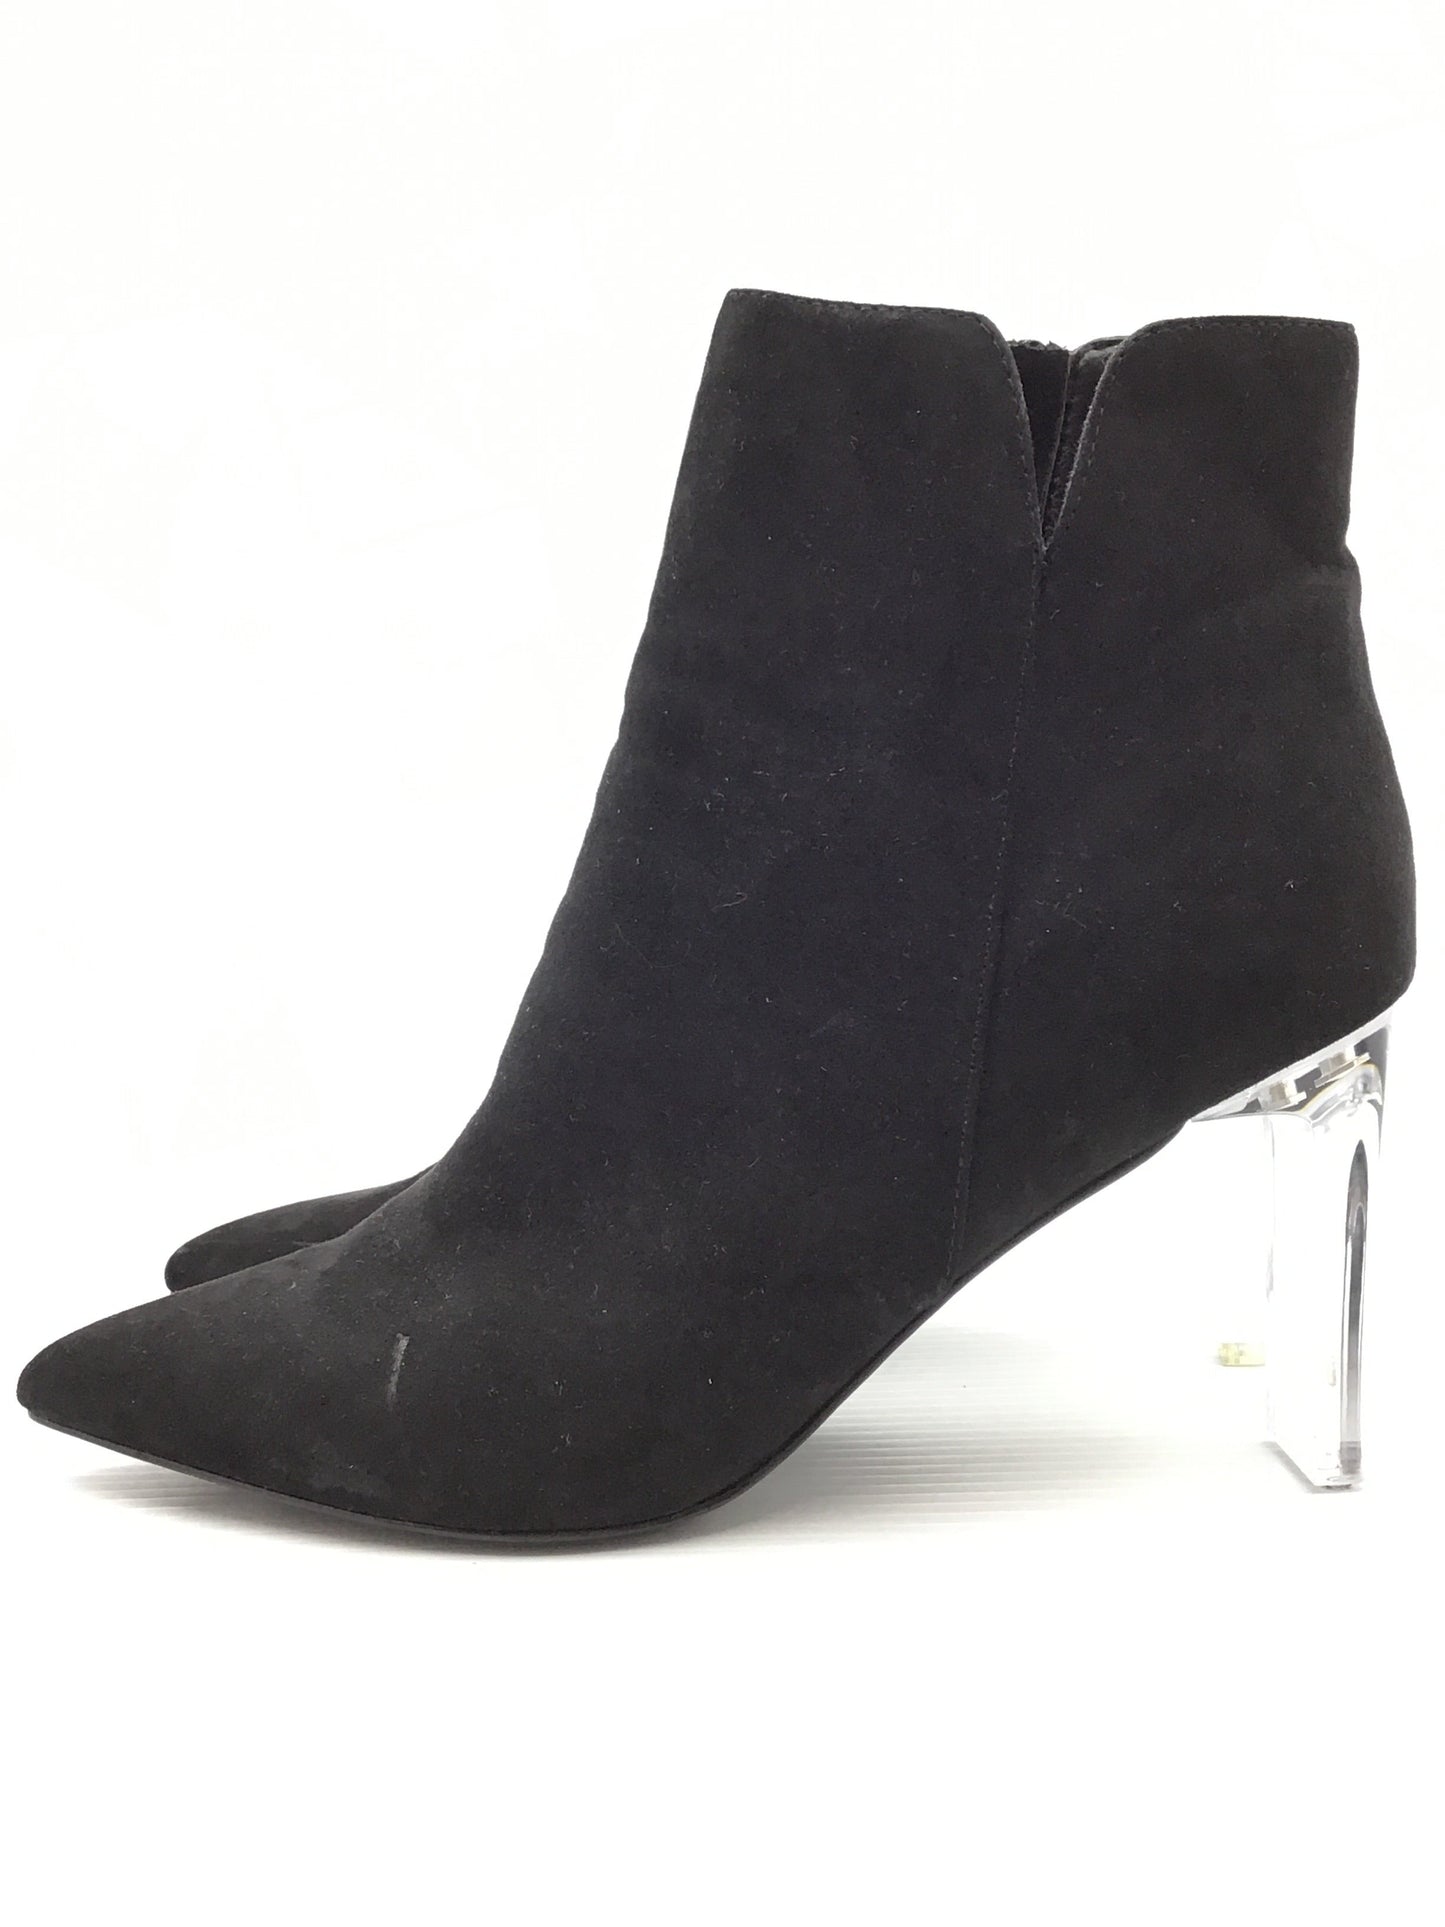 Boots Ankle Heels By Marc New York  Size: 11